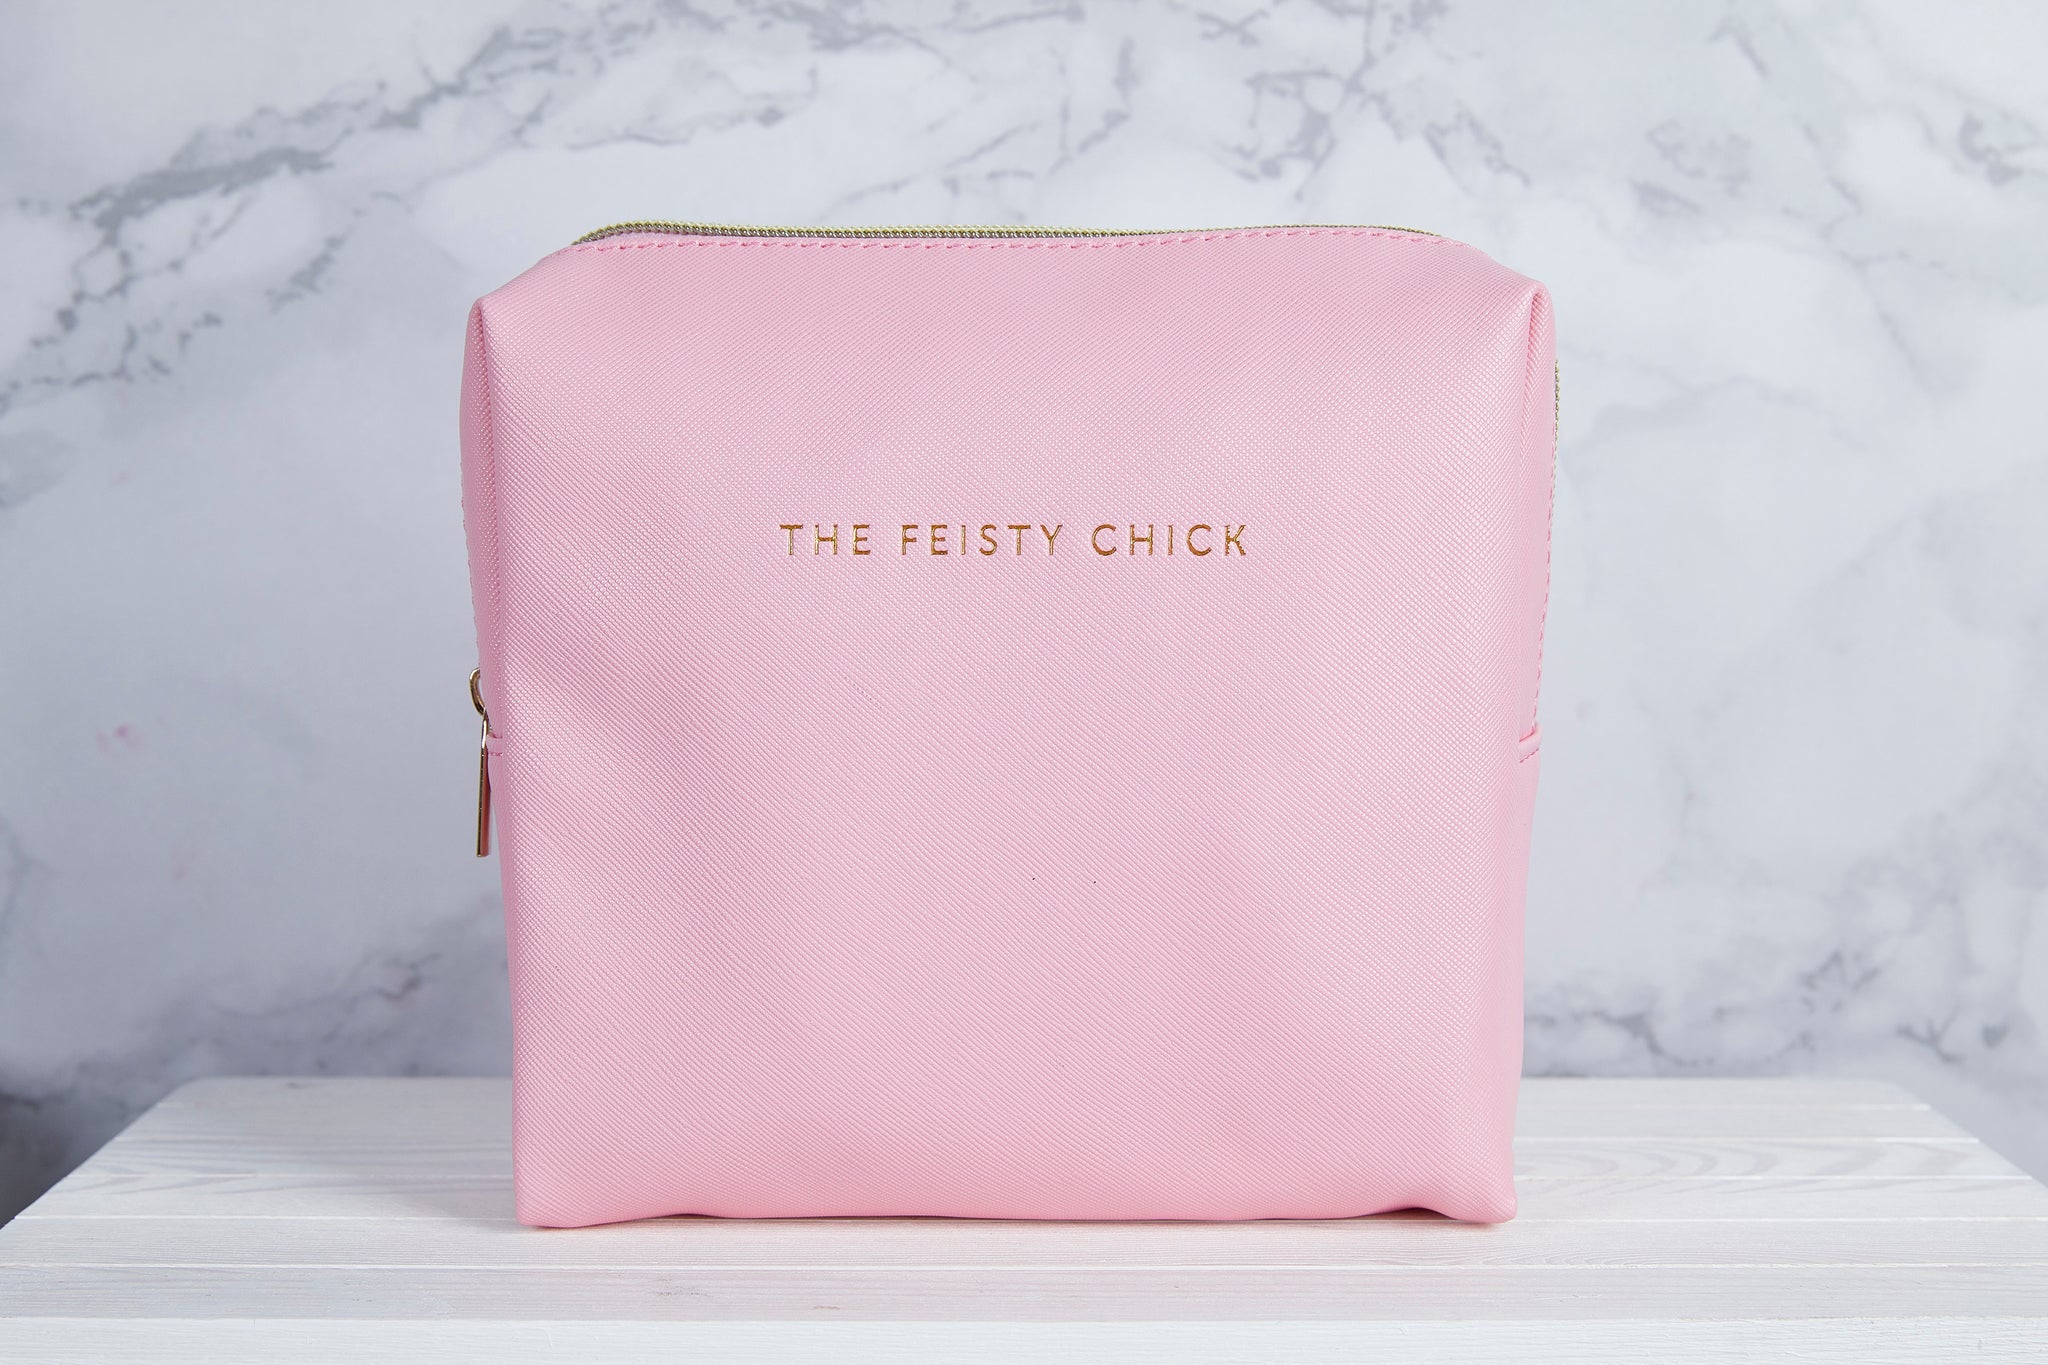 The Feisty Chick Pouch